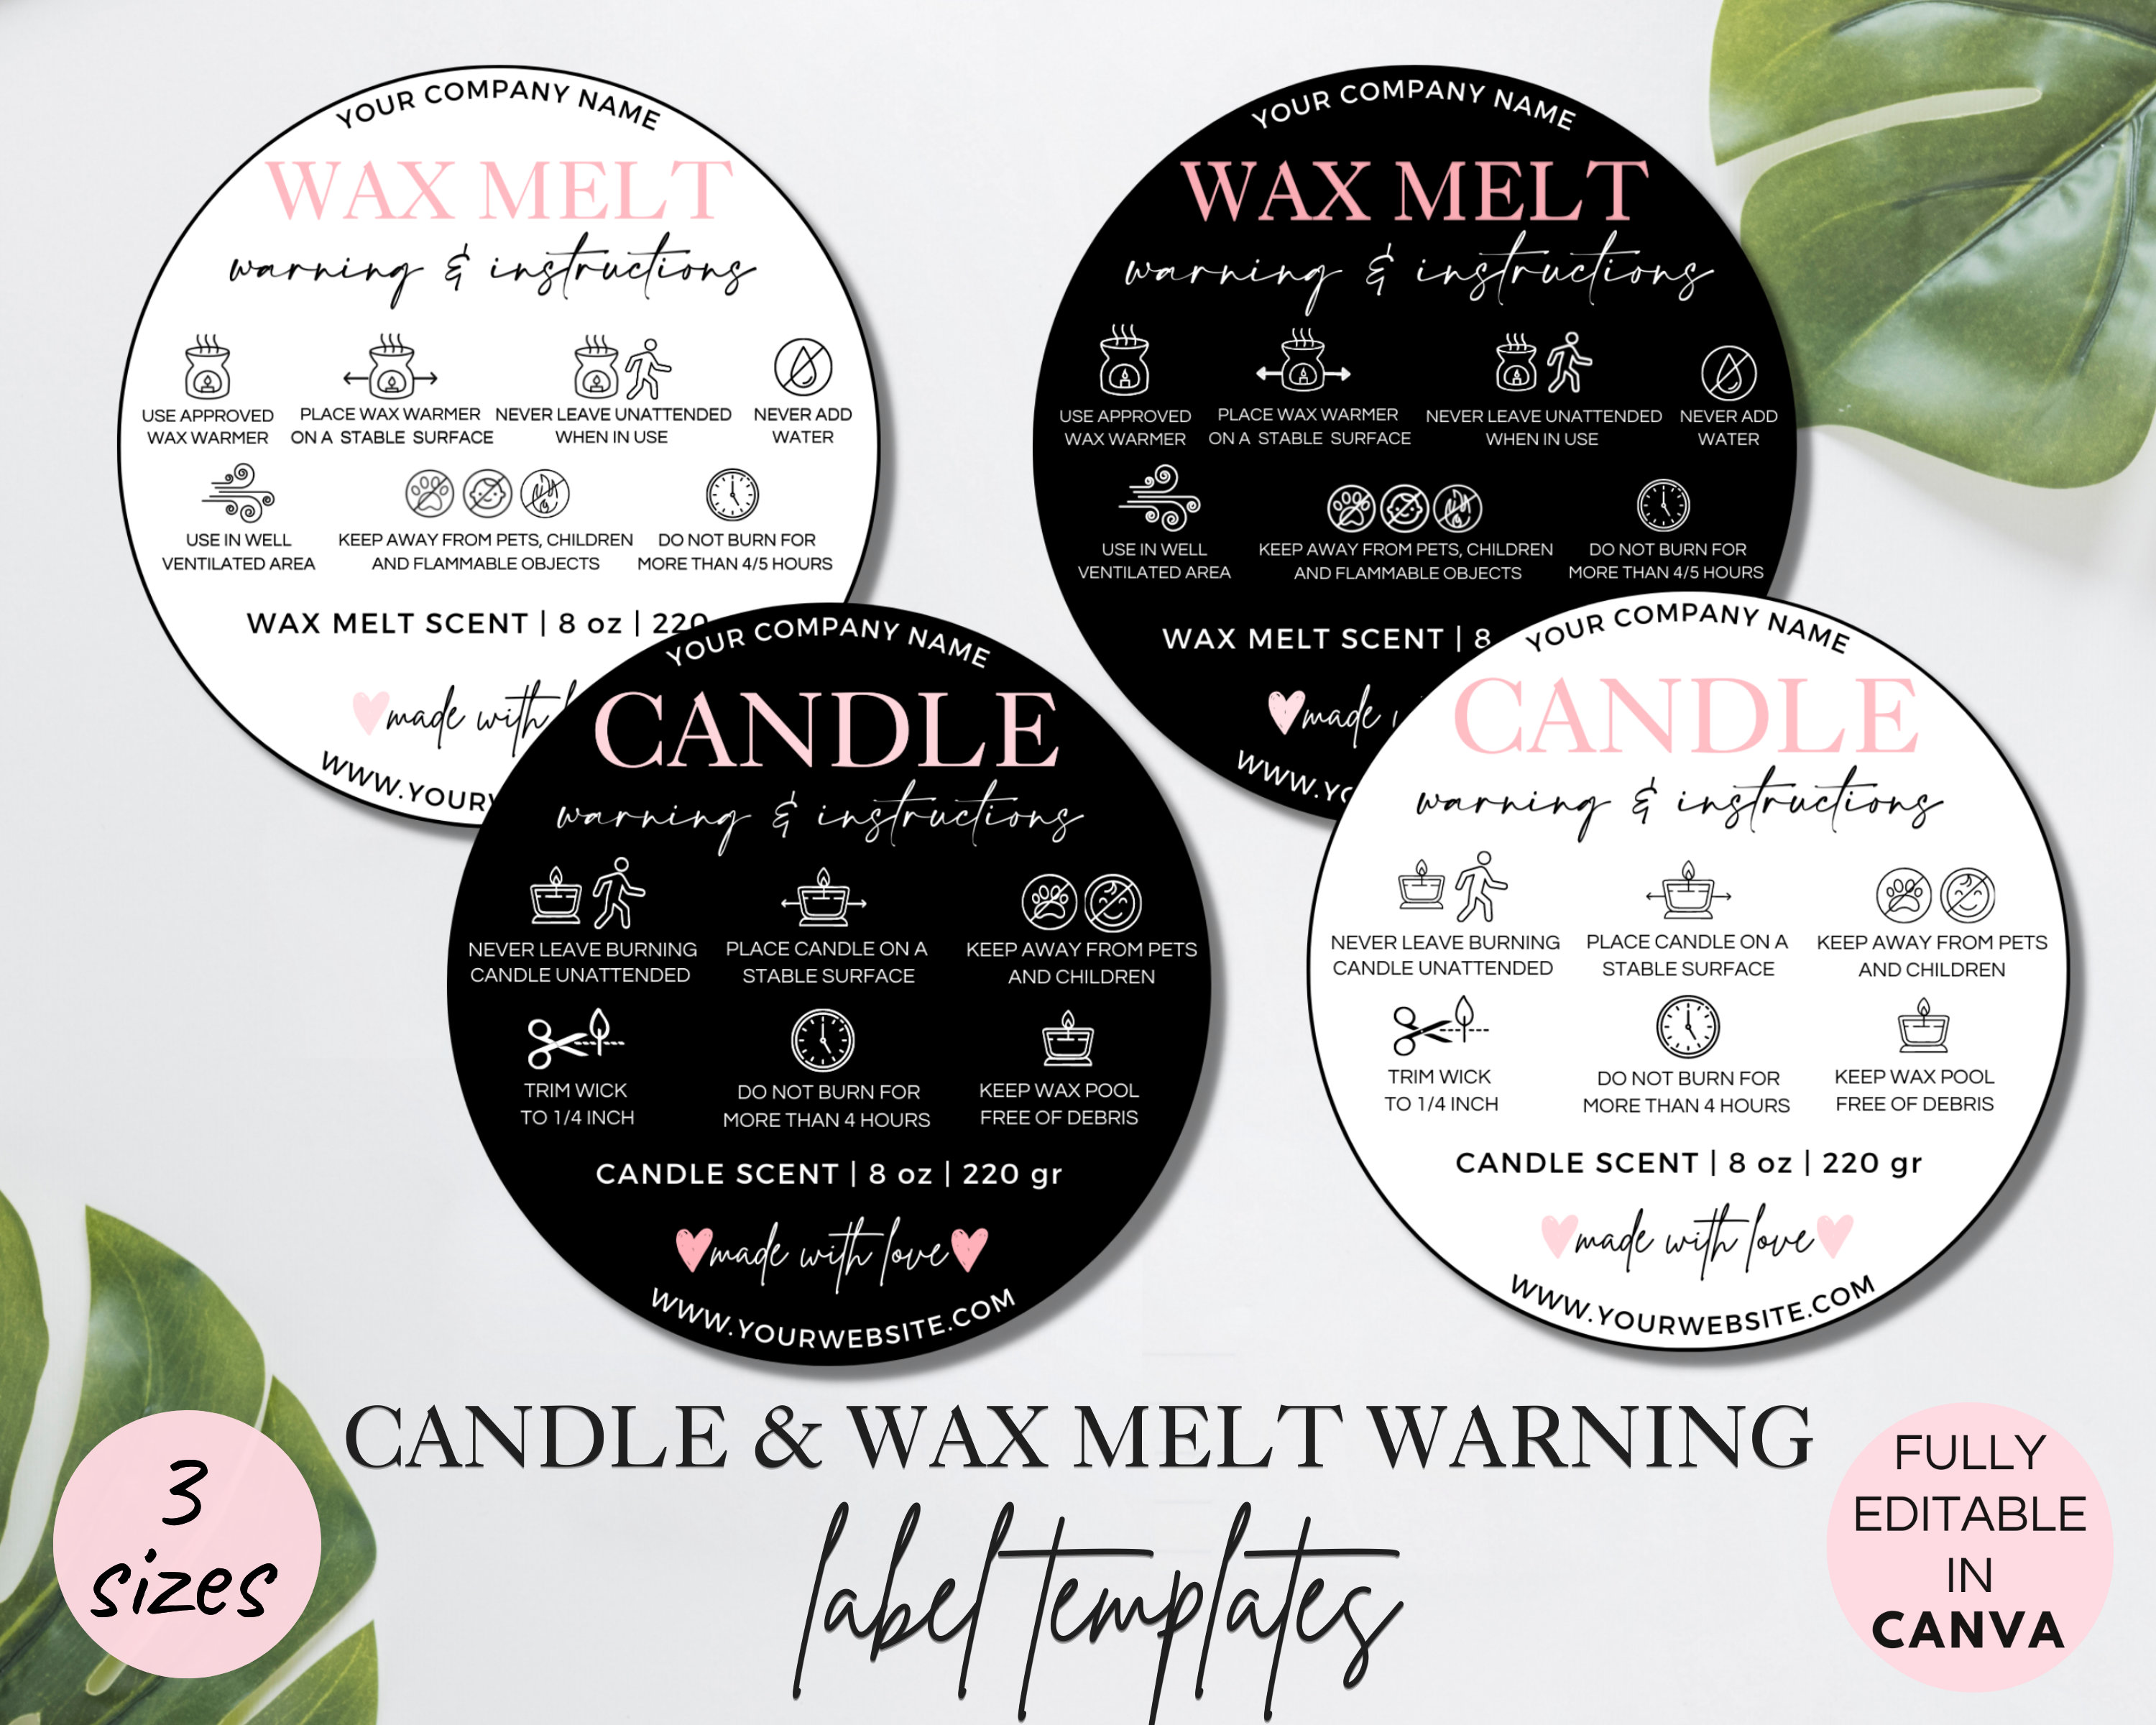 Warning Labels for Container Candles or Wax Melts